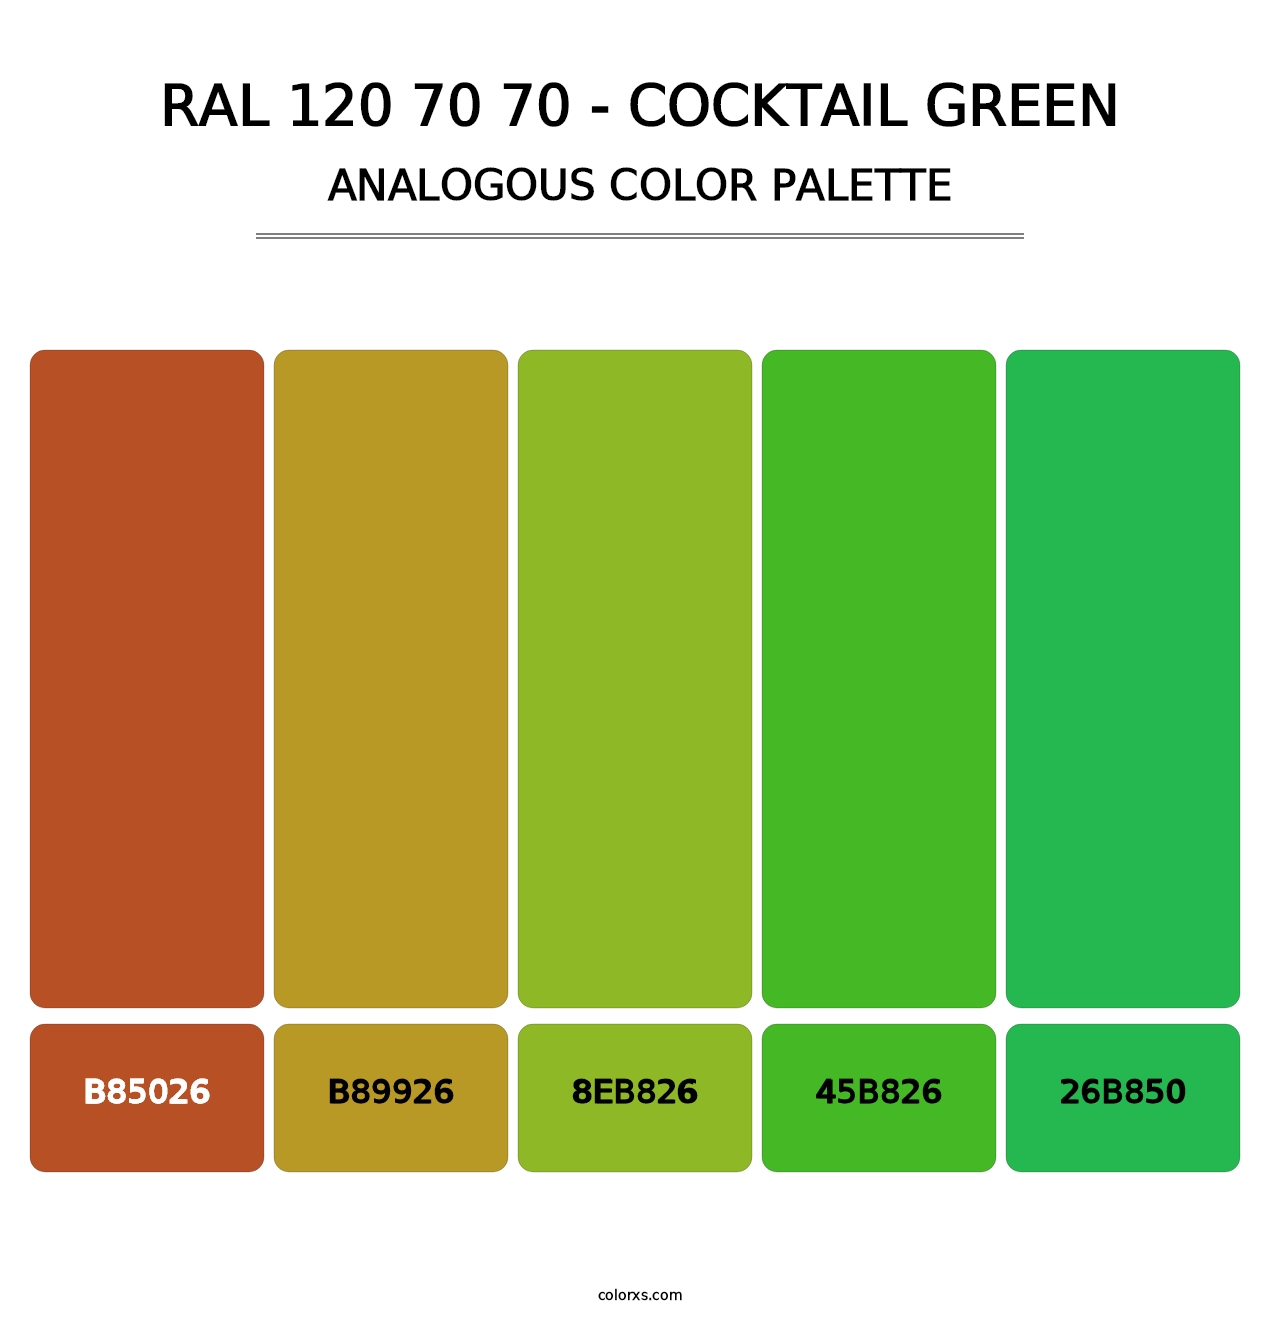 RAL 120 70 70 - Cocktail Green - Analogous Color Palette